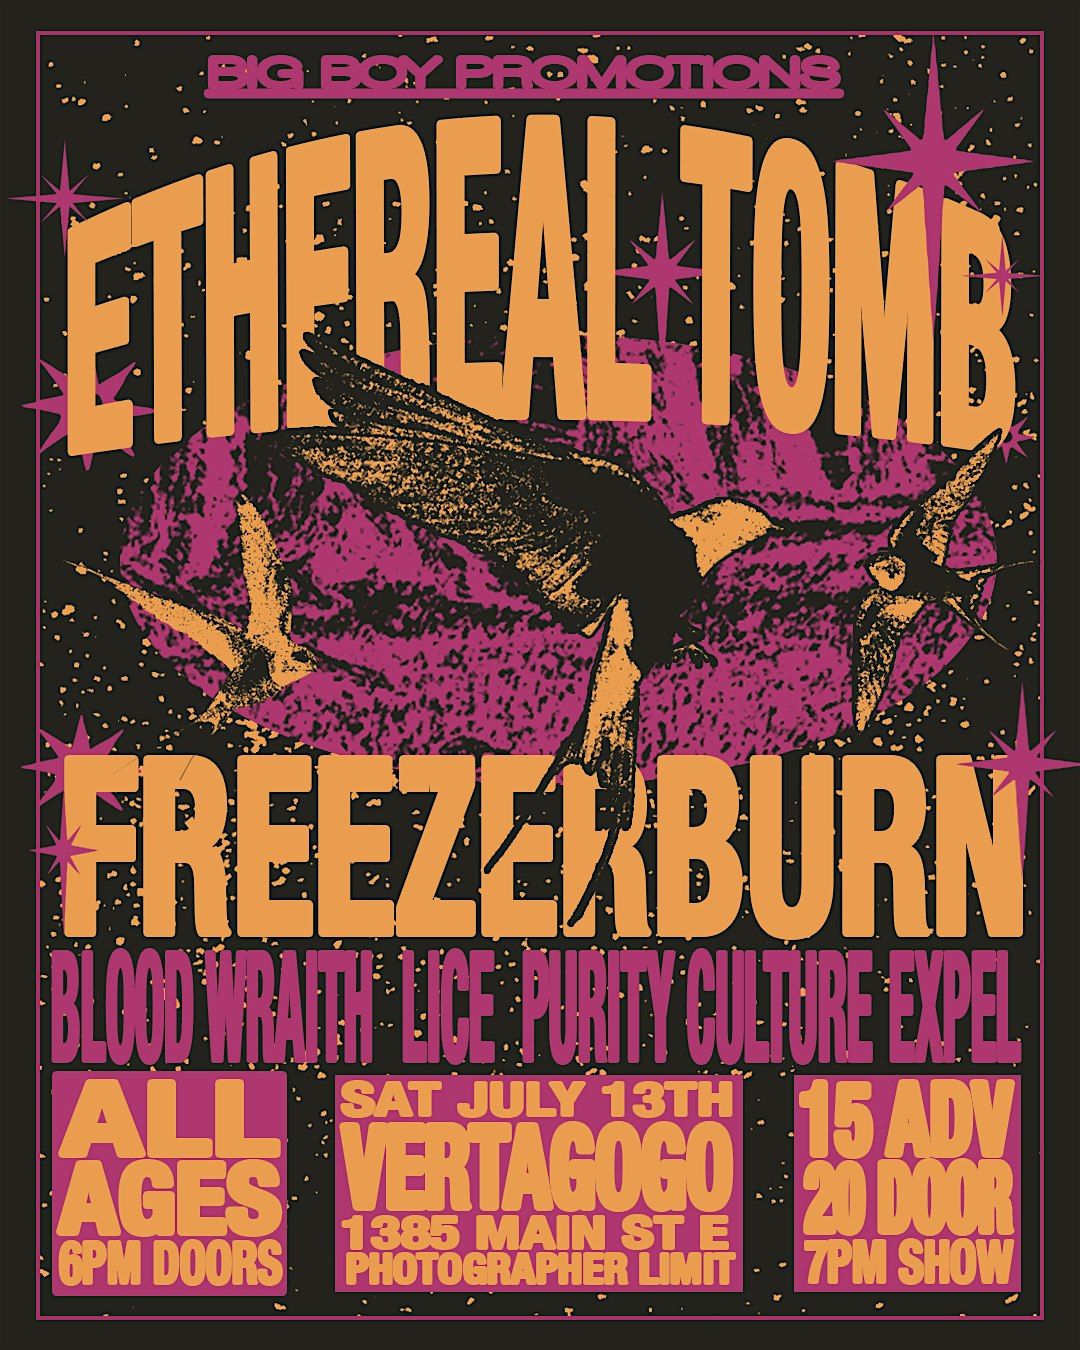 Ethereal Tomb w\/ Freezerburn, Blood Wraith, Lice, Purity Culture & Expel